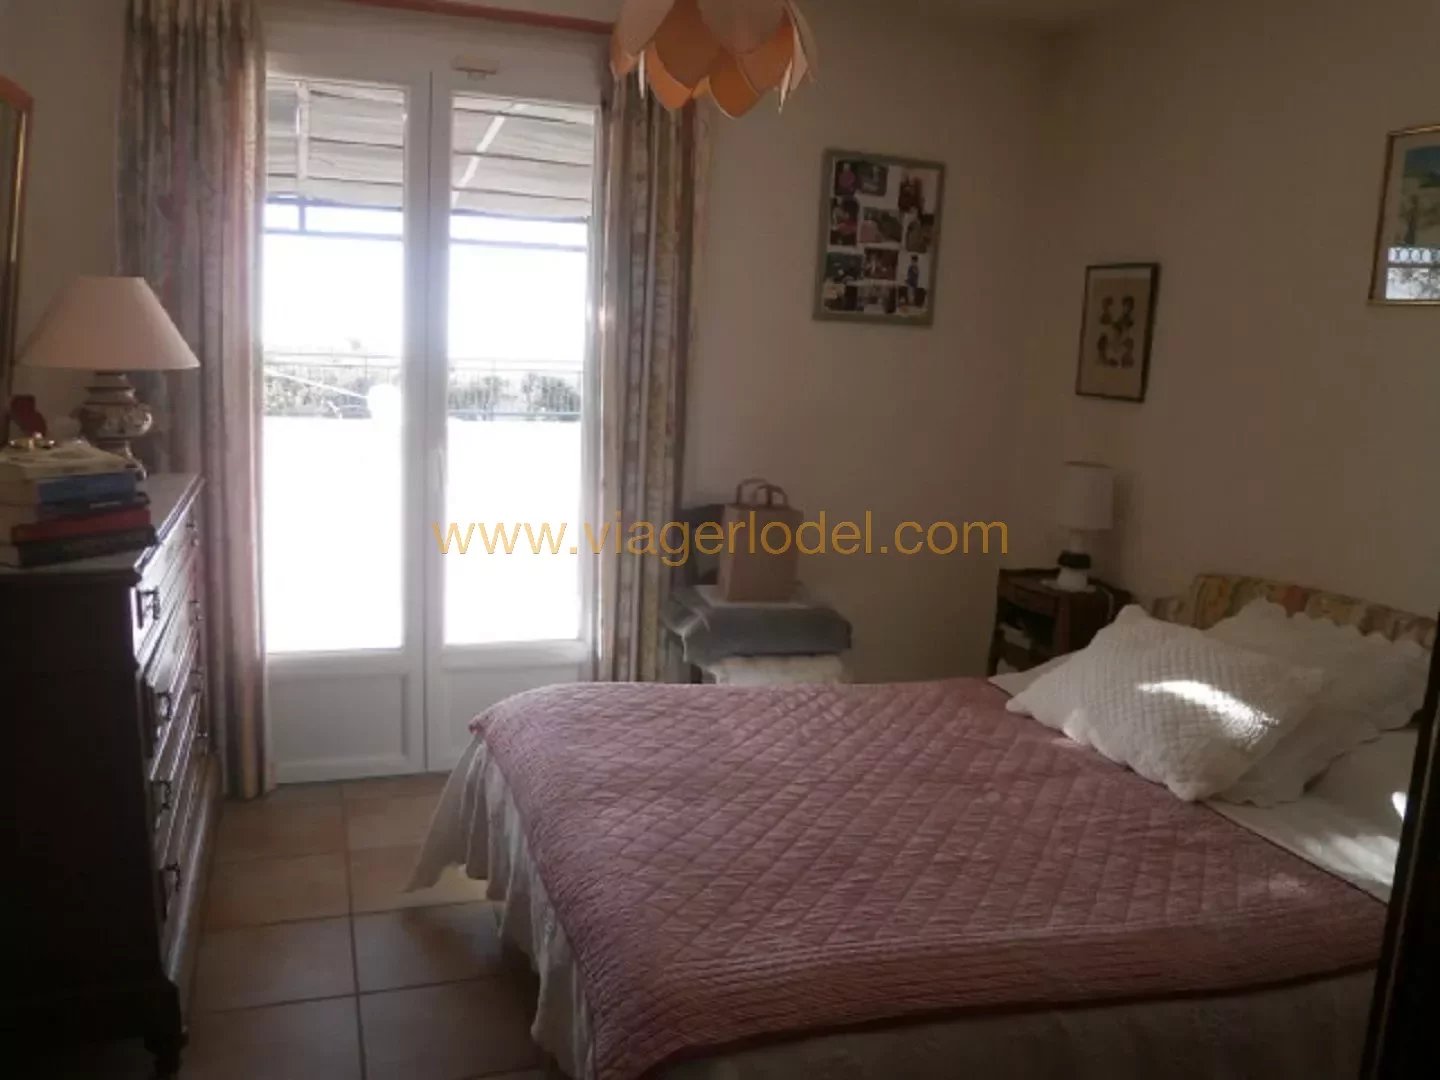 Ref. 9073 OCCUPIED VIAGER (LIFE ANNUITY), MONS (83)